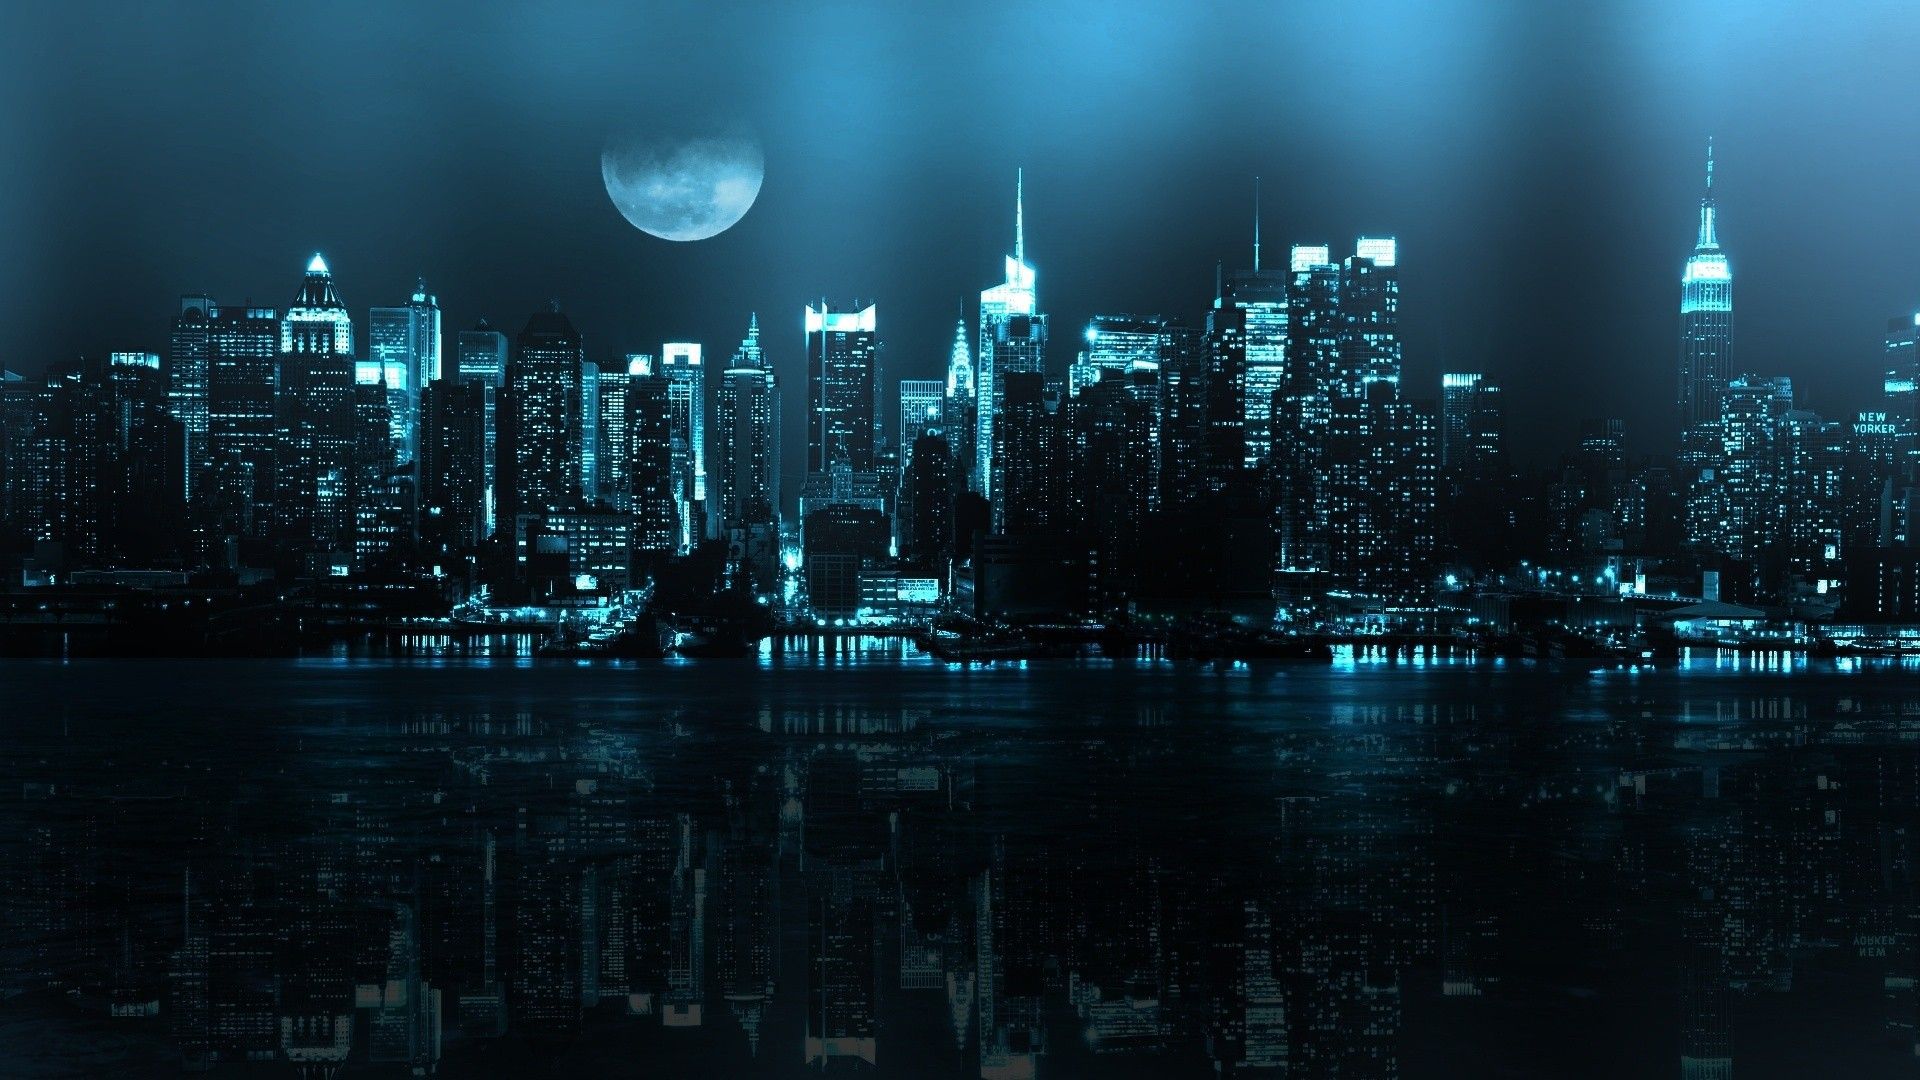 Night City Wallpapers High Resolution For Desktop 1920x1080 px ...